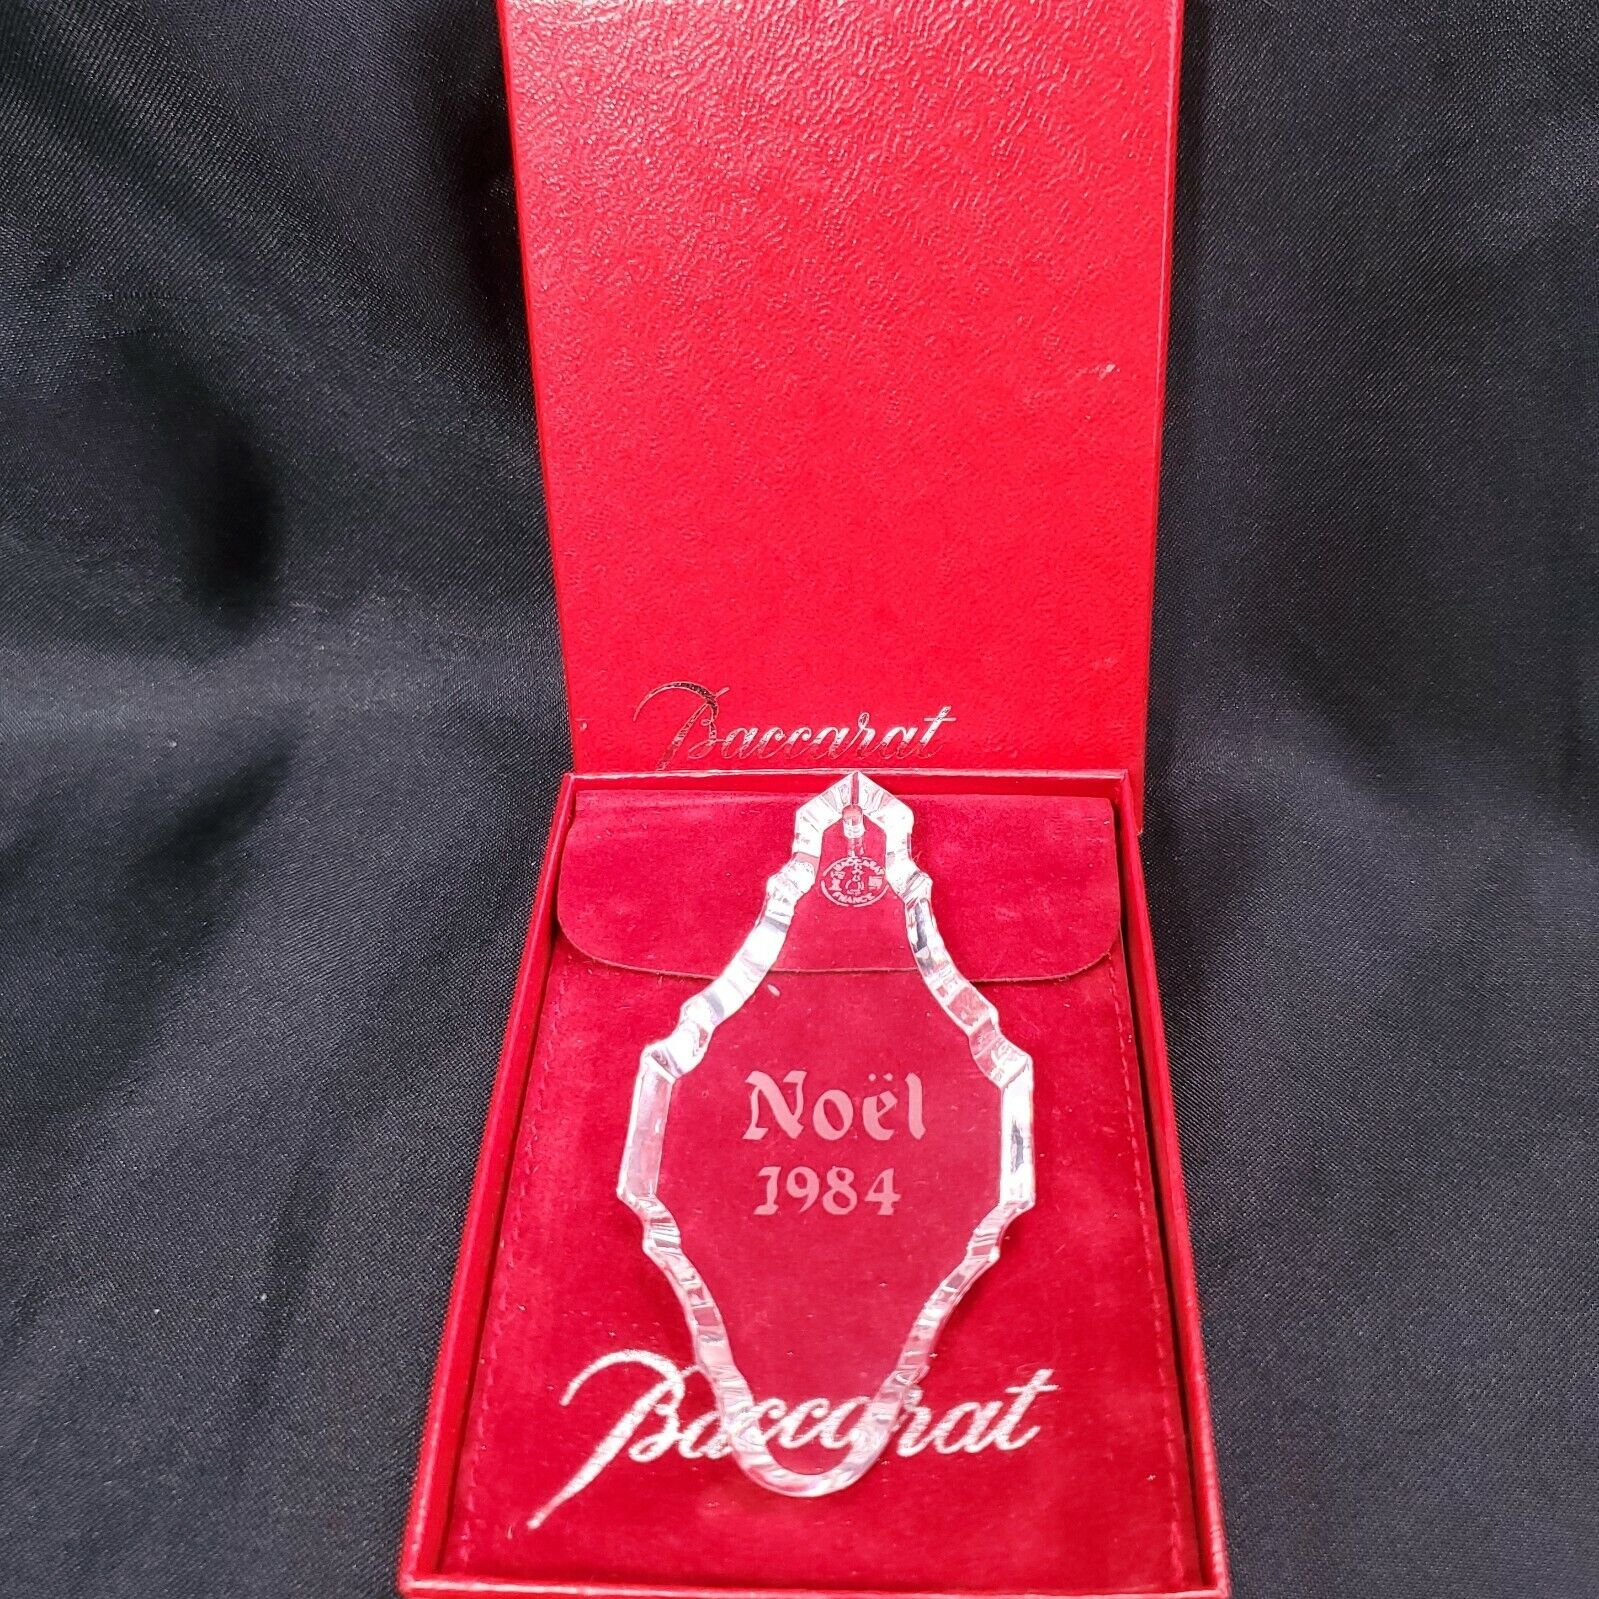 Primary image for Baccarat Annual Ornament 1984 Crystal Noel Bauble 3.5" in Box Christmas